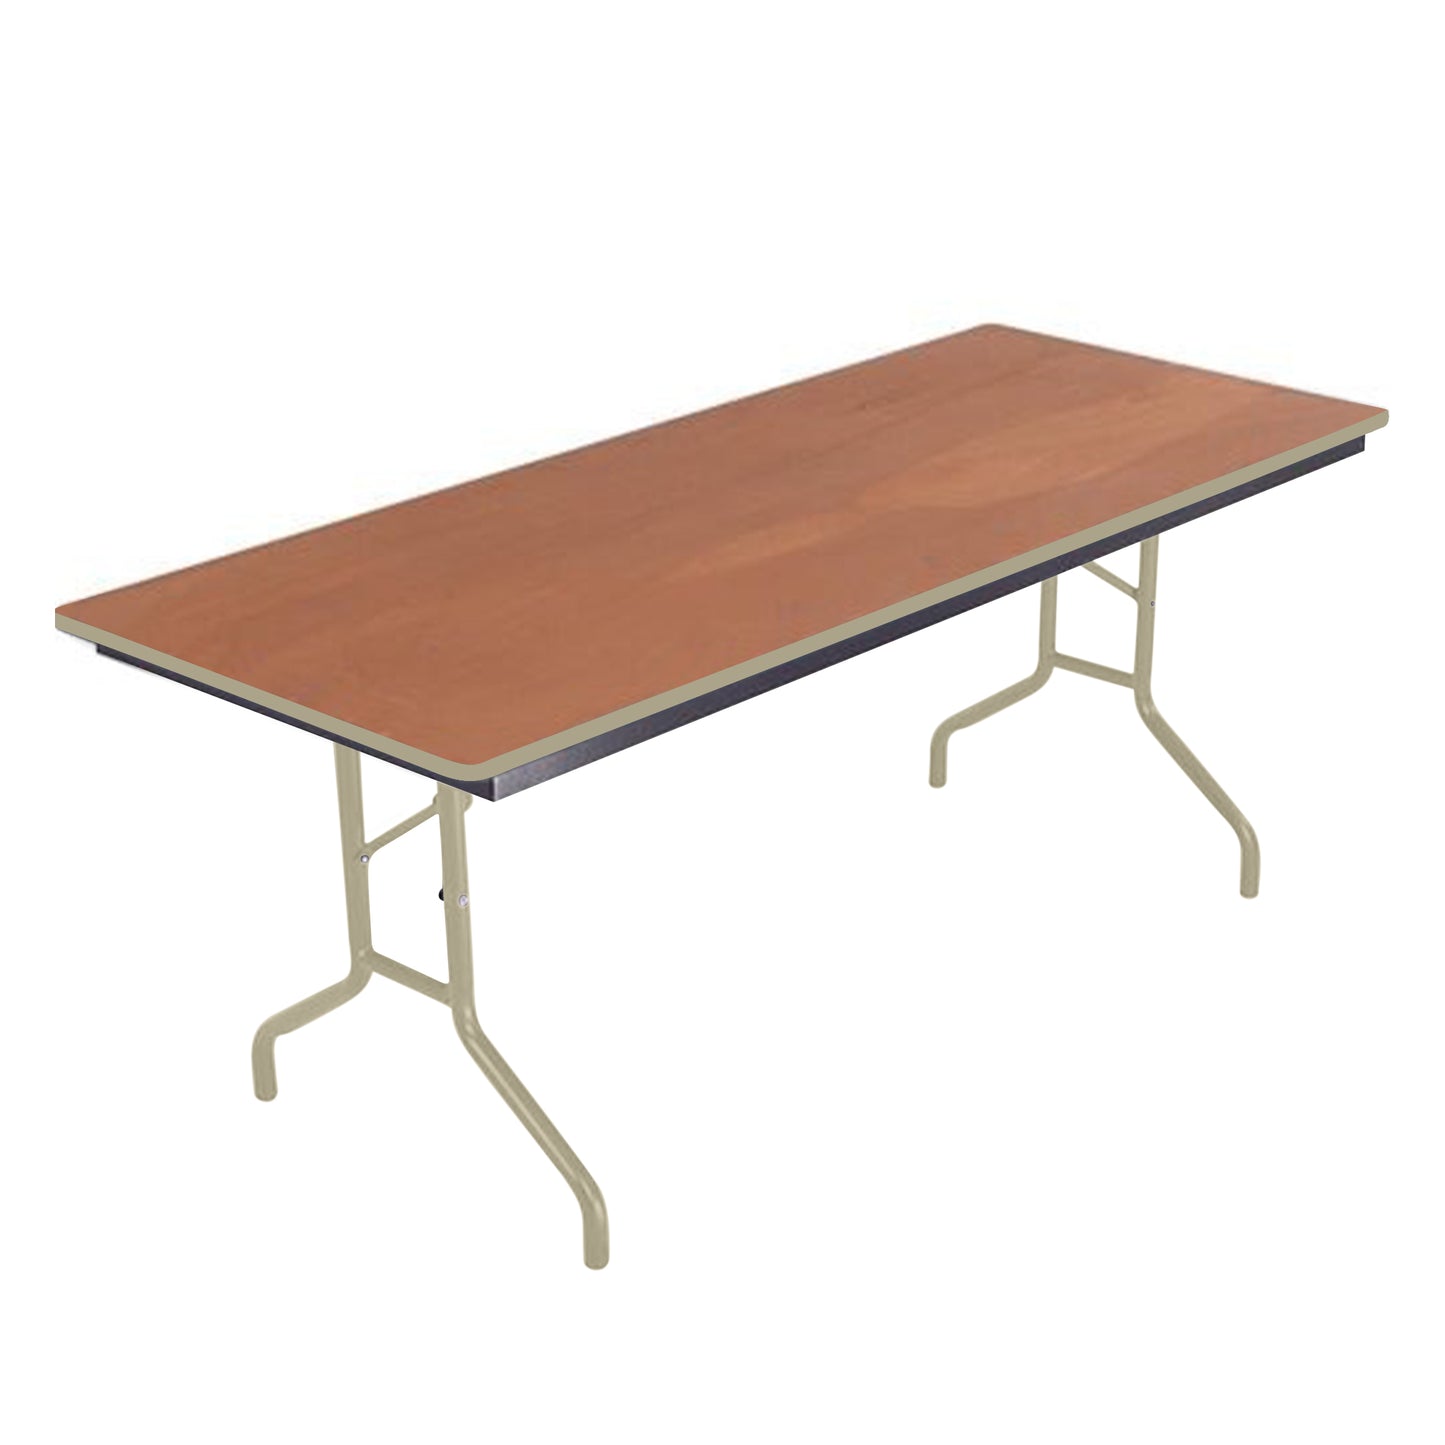 AmTab Folding Table - Plywood Stained and Sealed - Vinyl T-Molding Edge - 30"W x 96"L x 29"H  (AmTab AMT-308PM)